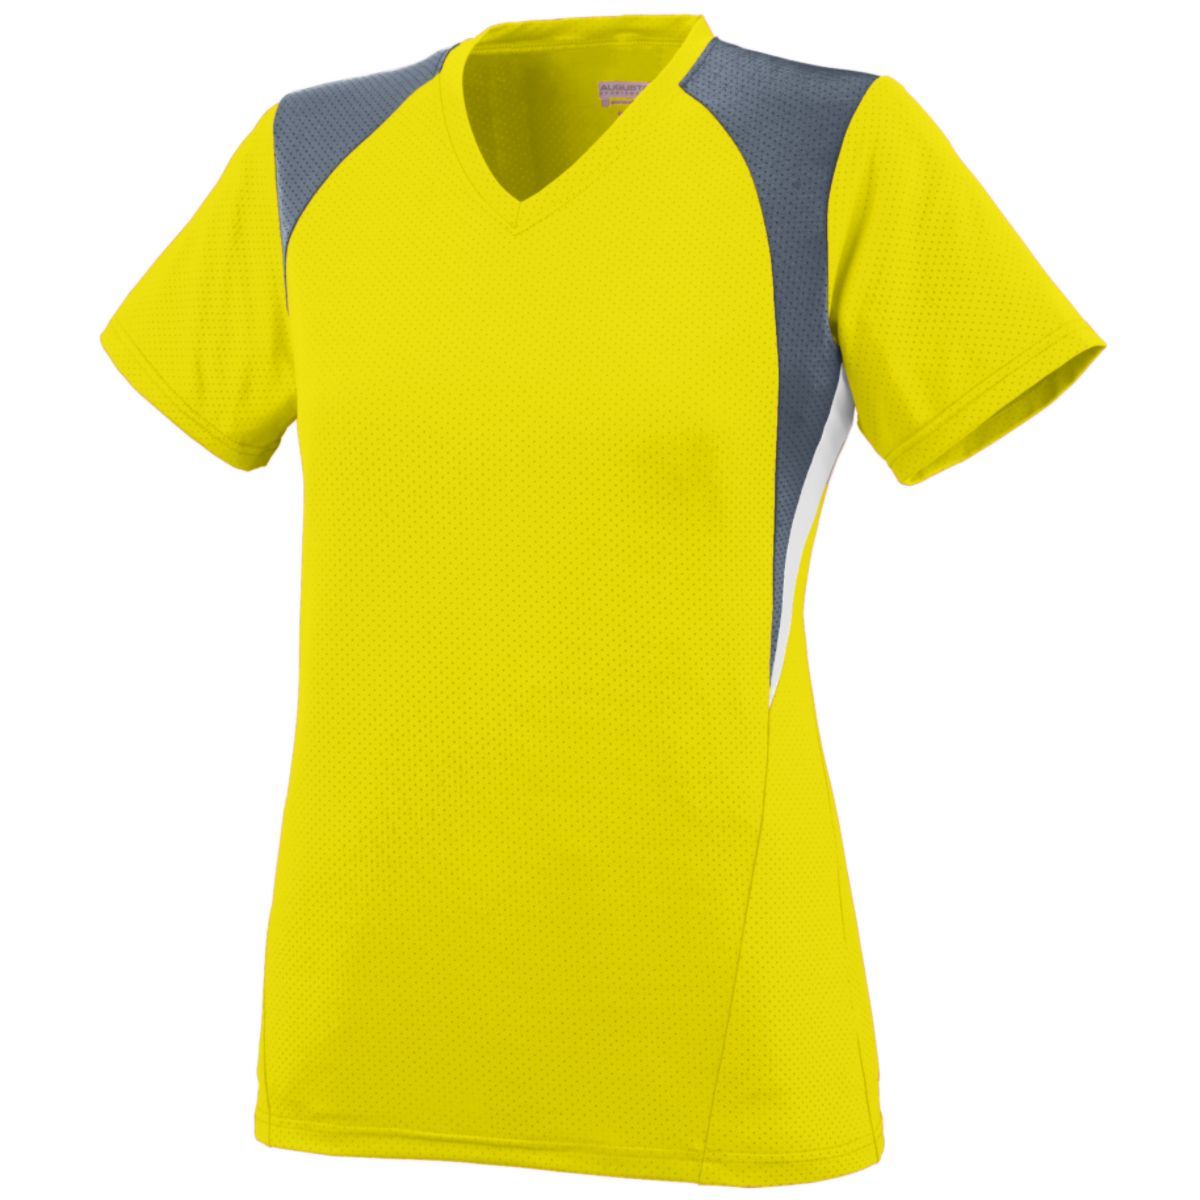 Augusta Sportswear Ladies Mystic Jersey in Power Yellow/Graphite/White  -Part of the Ladies, Ladies-Jersey, Augusta-Products, Soccer, Shirts, All-Sports-1 product lines at KanaleyCreations.com